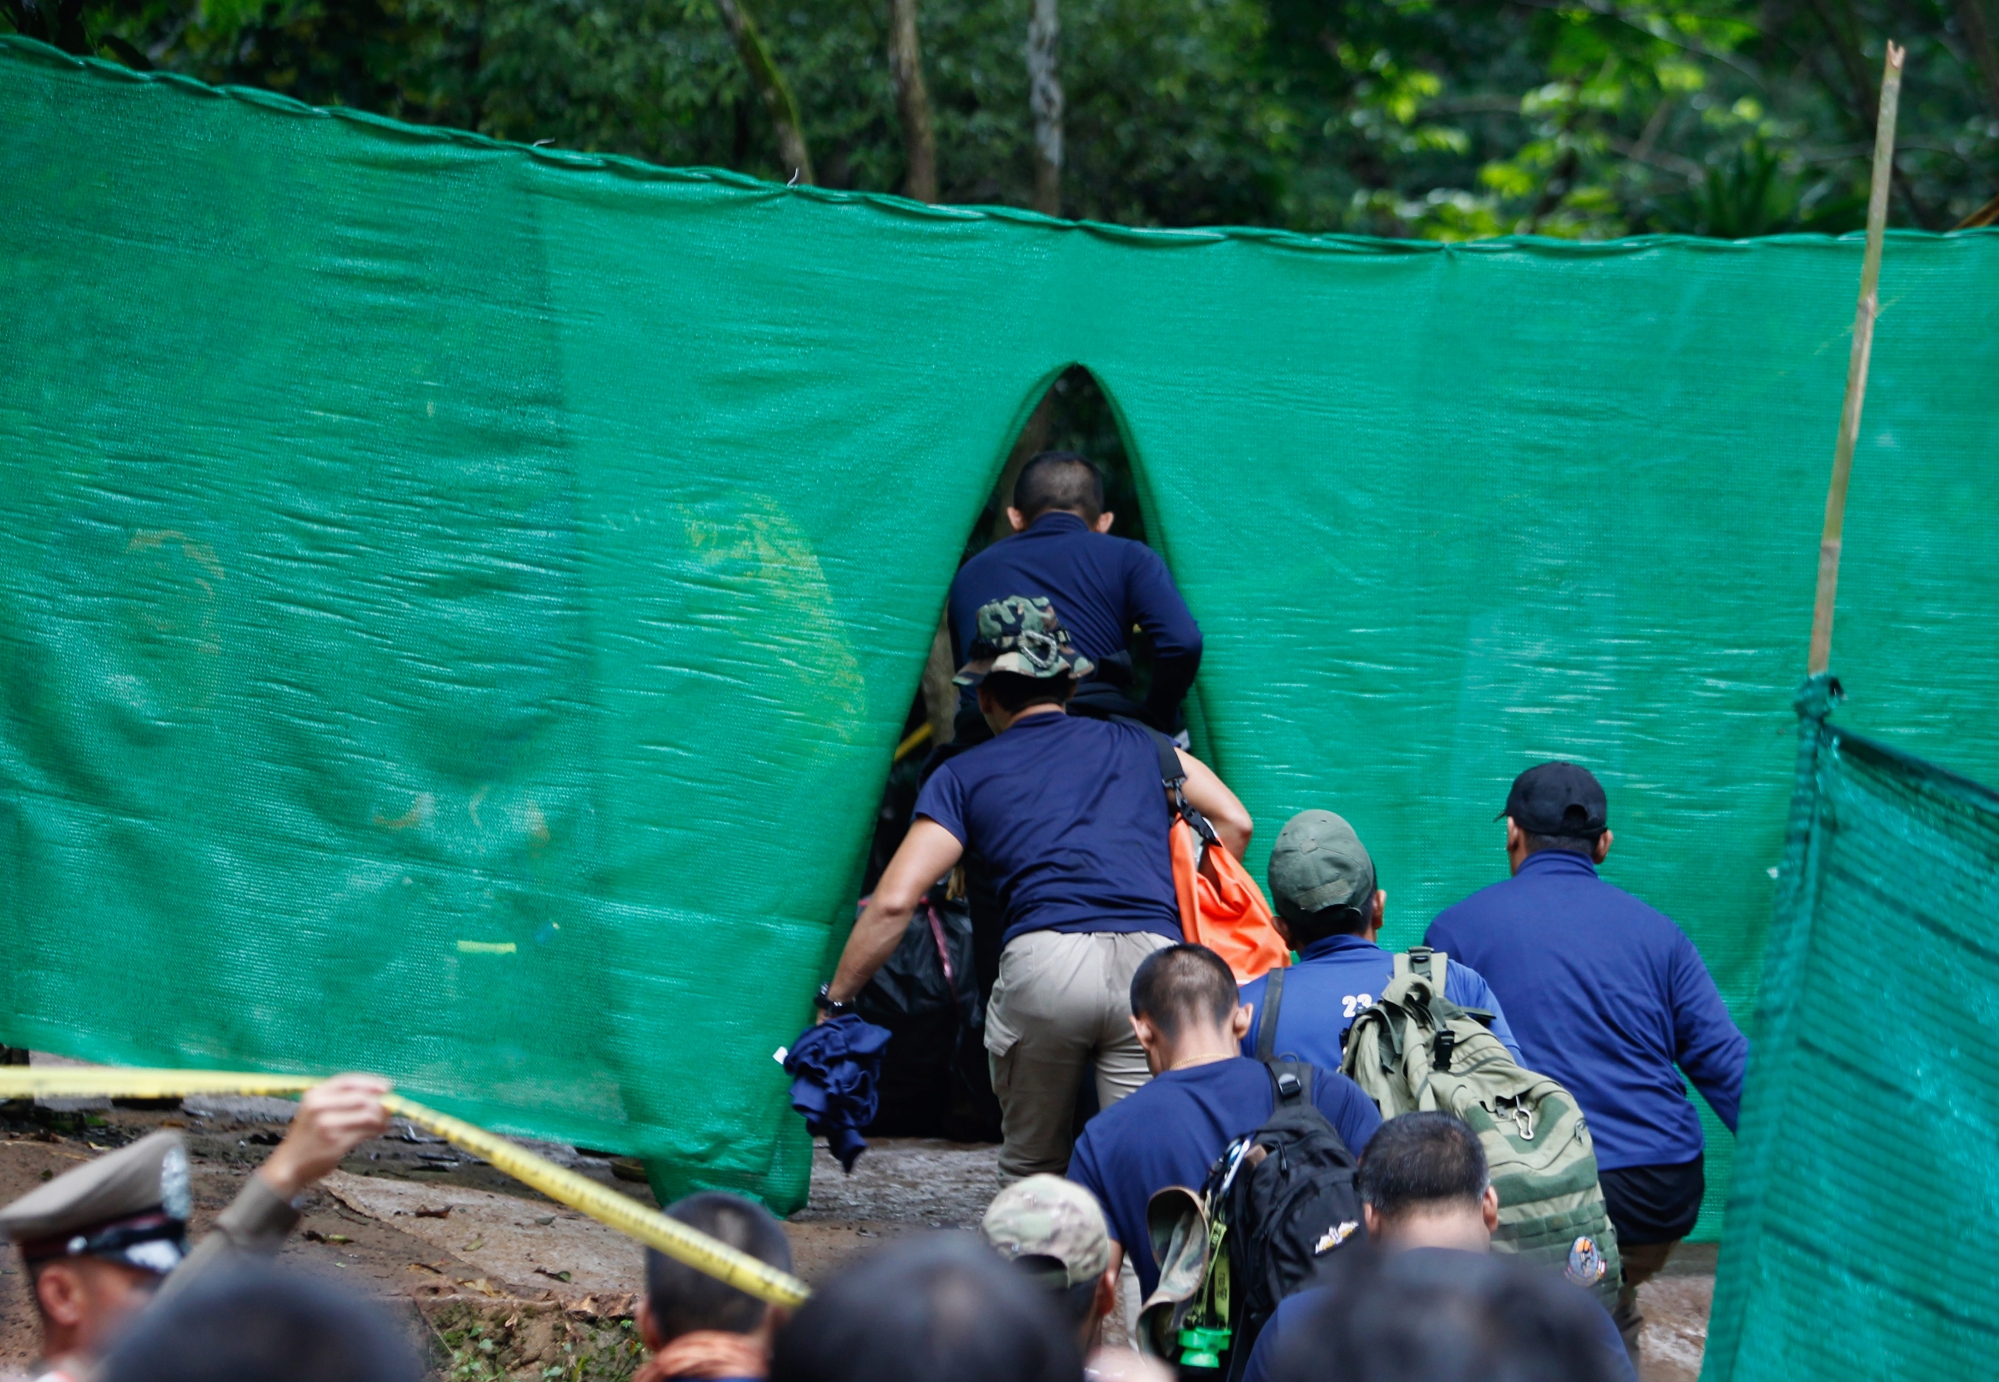 epa06873276 Thai military personnel walk inside the blocking area during rescue operations to save a soccer team at Tham Luang cave in Khun Nam Nang Non Forest Park, Chiang Rai province, Thailand, 08 July 2018. The officials' operations are underway to safely bring out the 13 members of the youth soccer team including their assistant coach who have been trapped in Tham Luang cave since 23 June 2018.  EPA/PONGMANAT TASIRI THAILAND ACCIDENTS CAVE